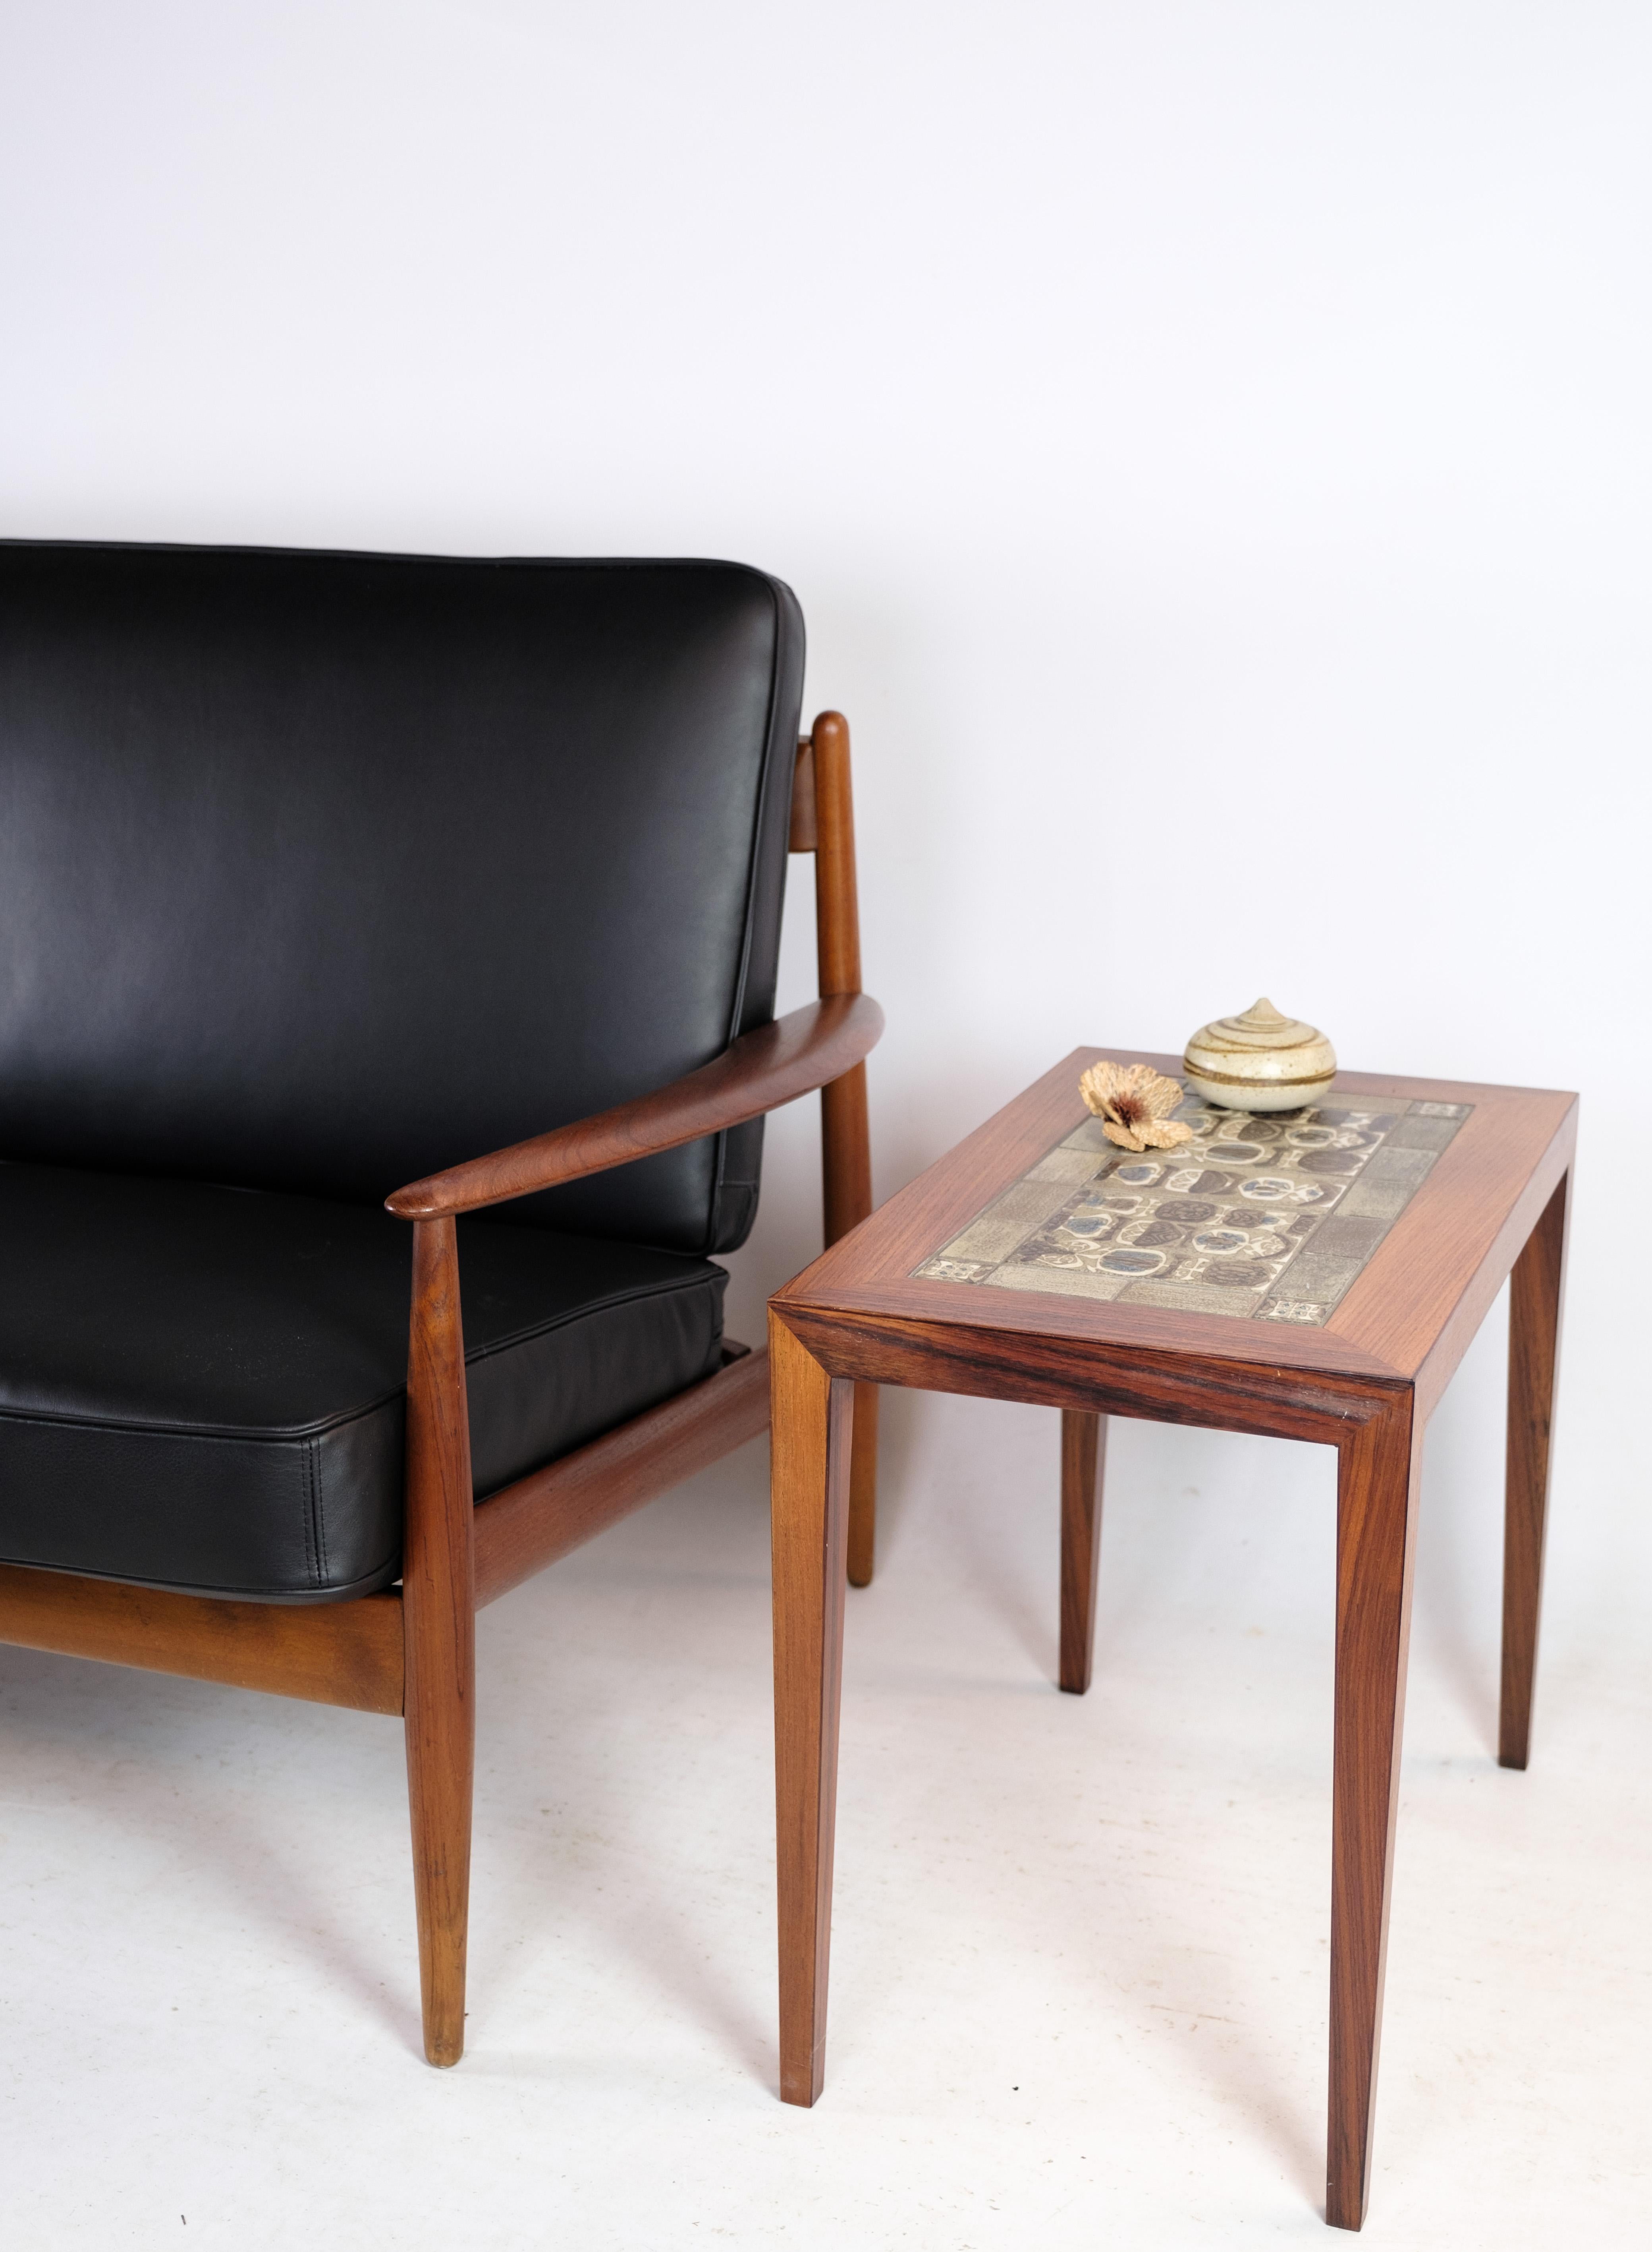 2 Seater Sofa Model 118 Made With a Teak Frame By Grete Jalk From 1960s For Sale 5